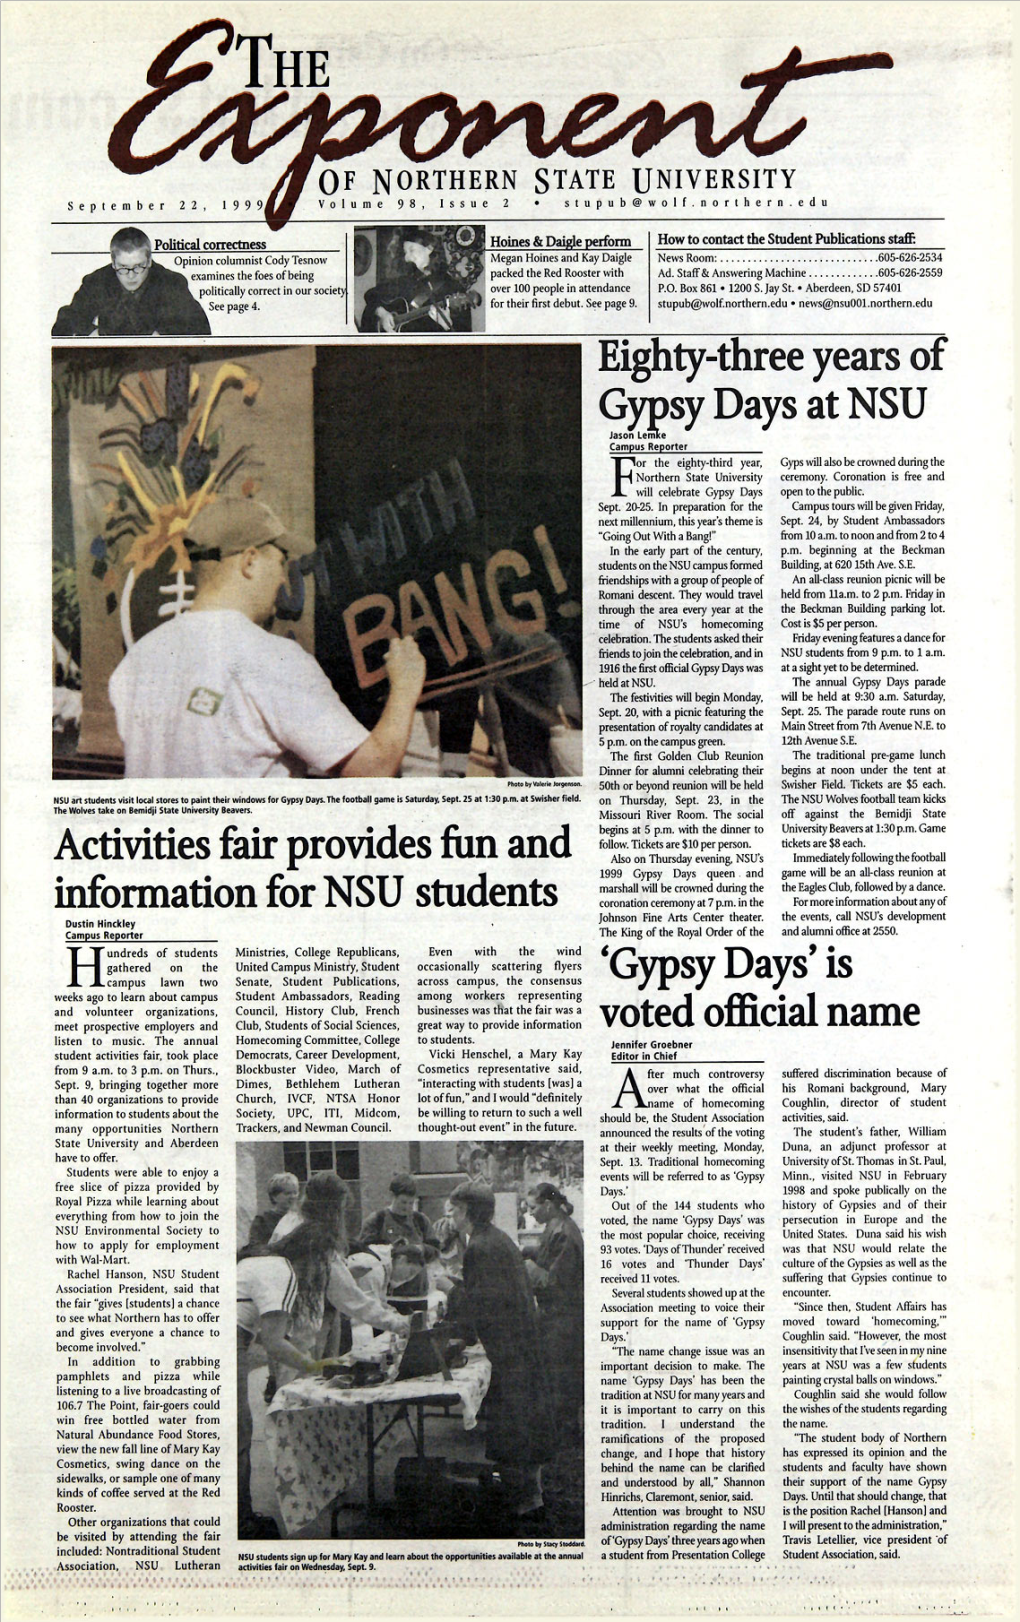 Eighty-Three Years of Gypsy Days at NSU Activities Fair Provides Fun and Information for NSU Students